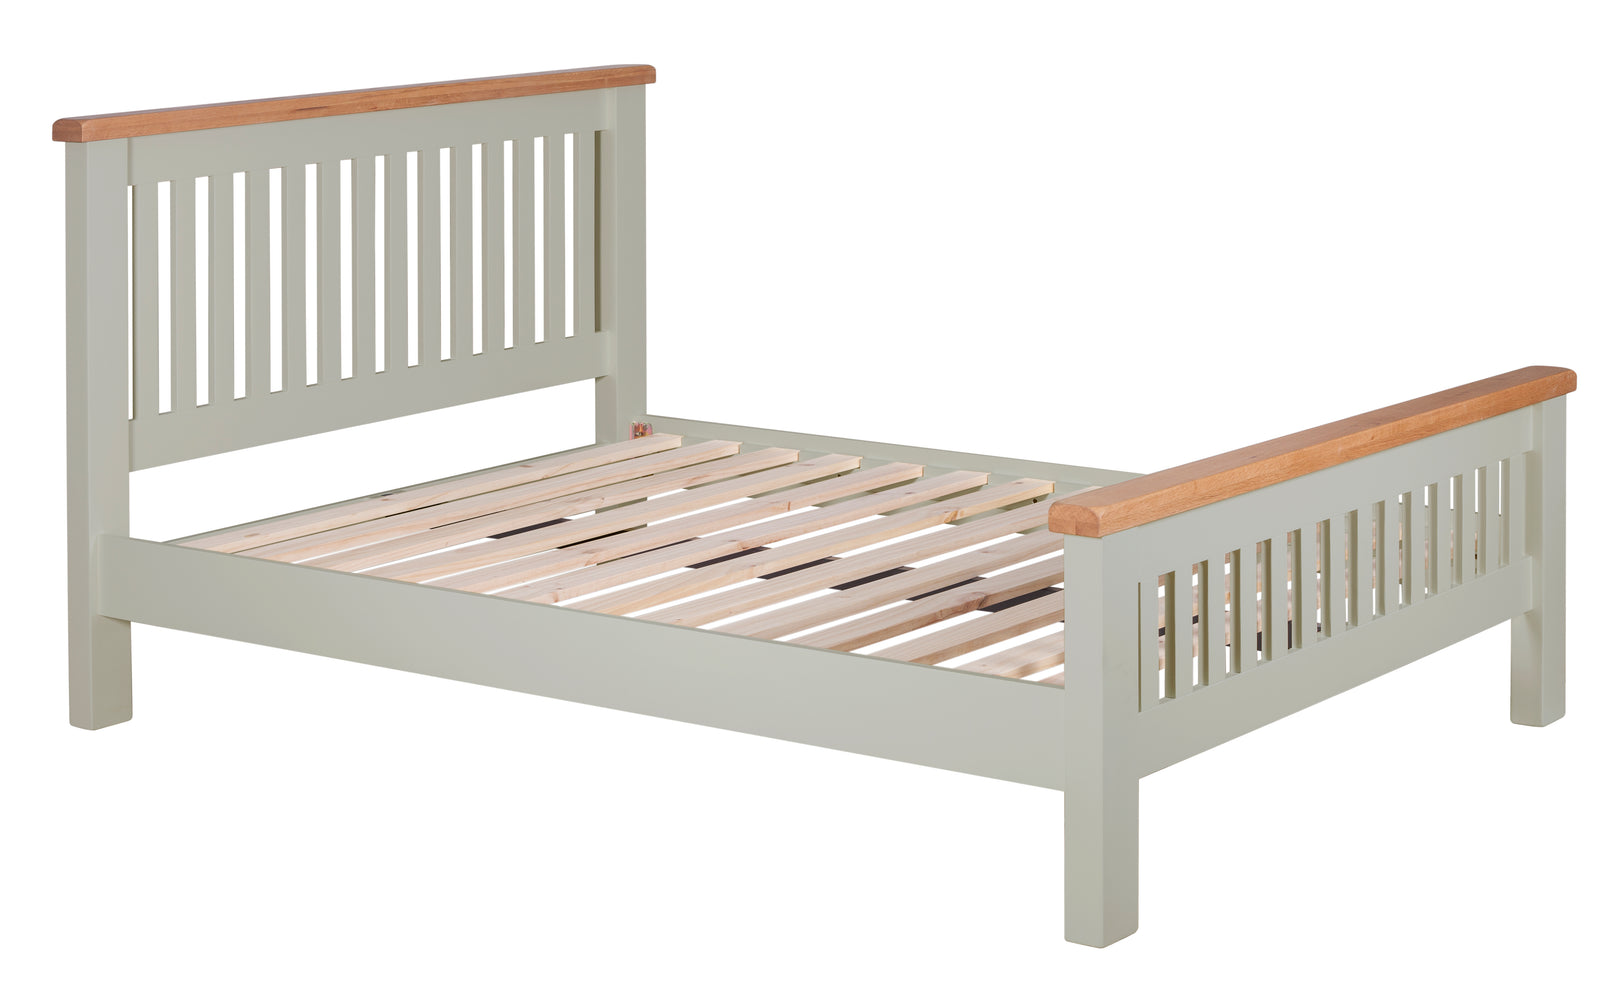 M1/Lucca 4"6' Double Bed